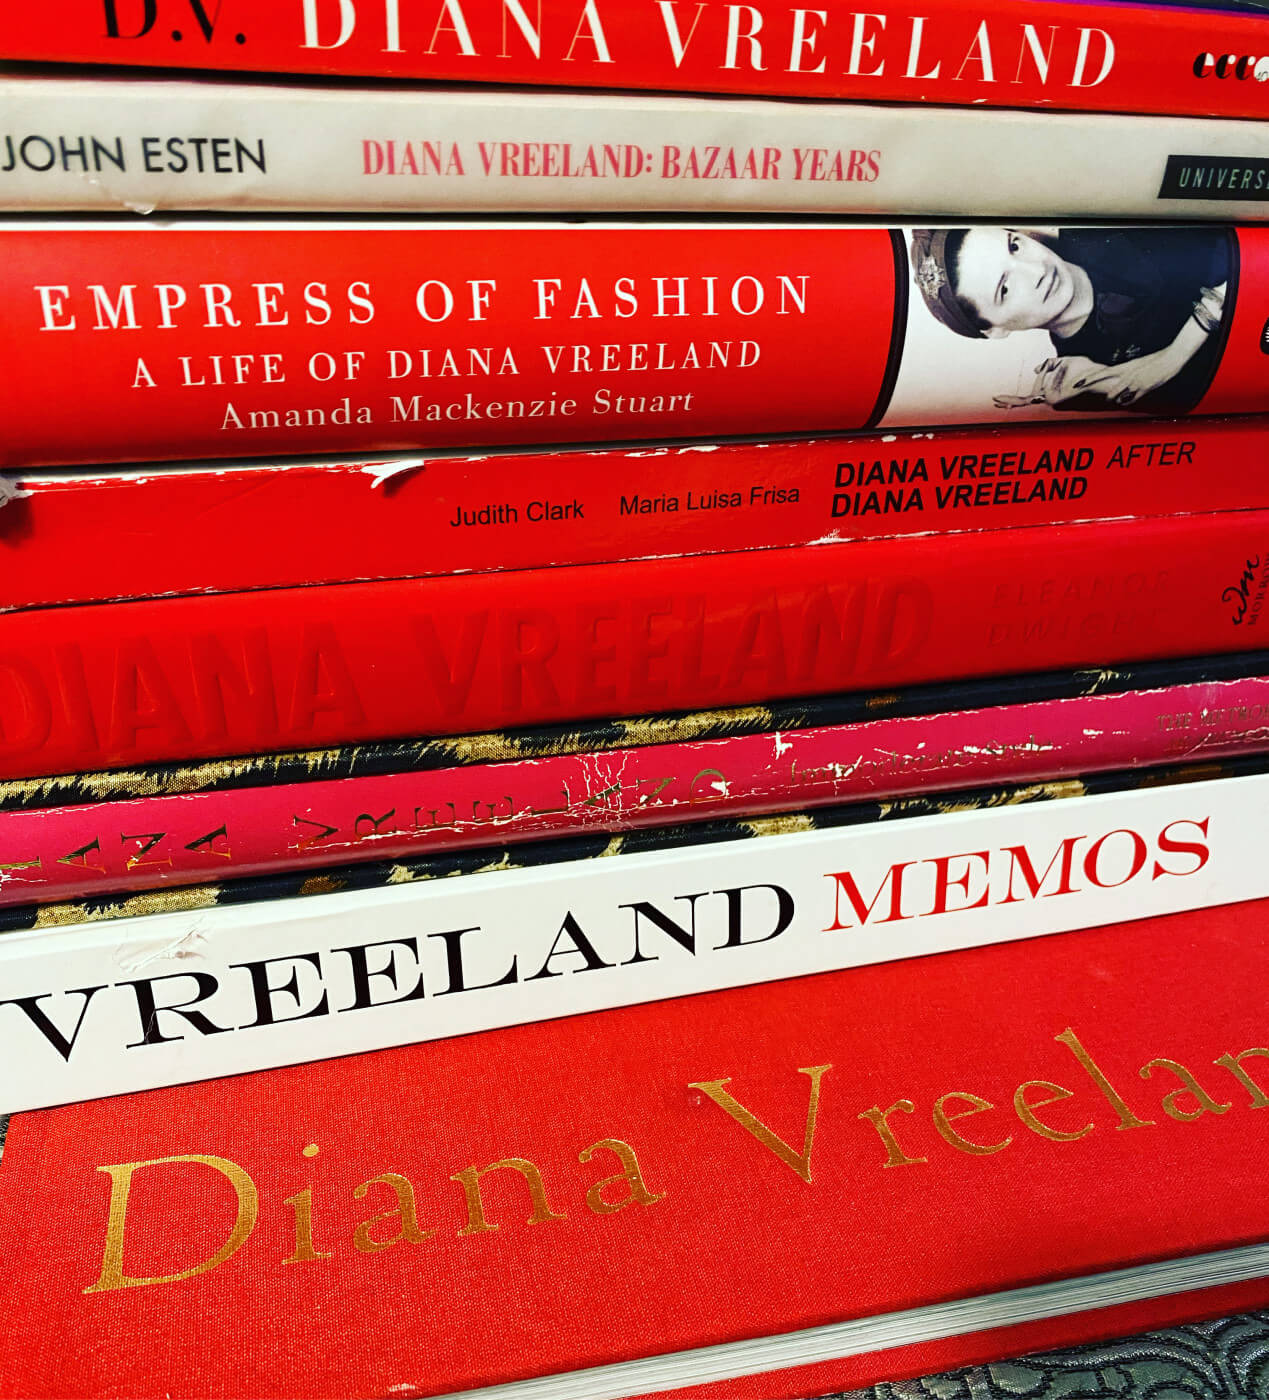 Diana Vreeland's Quotes and Advice on Style and Life